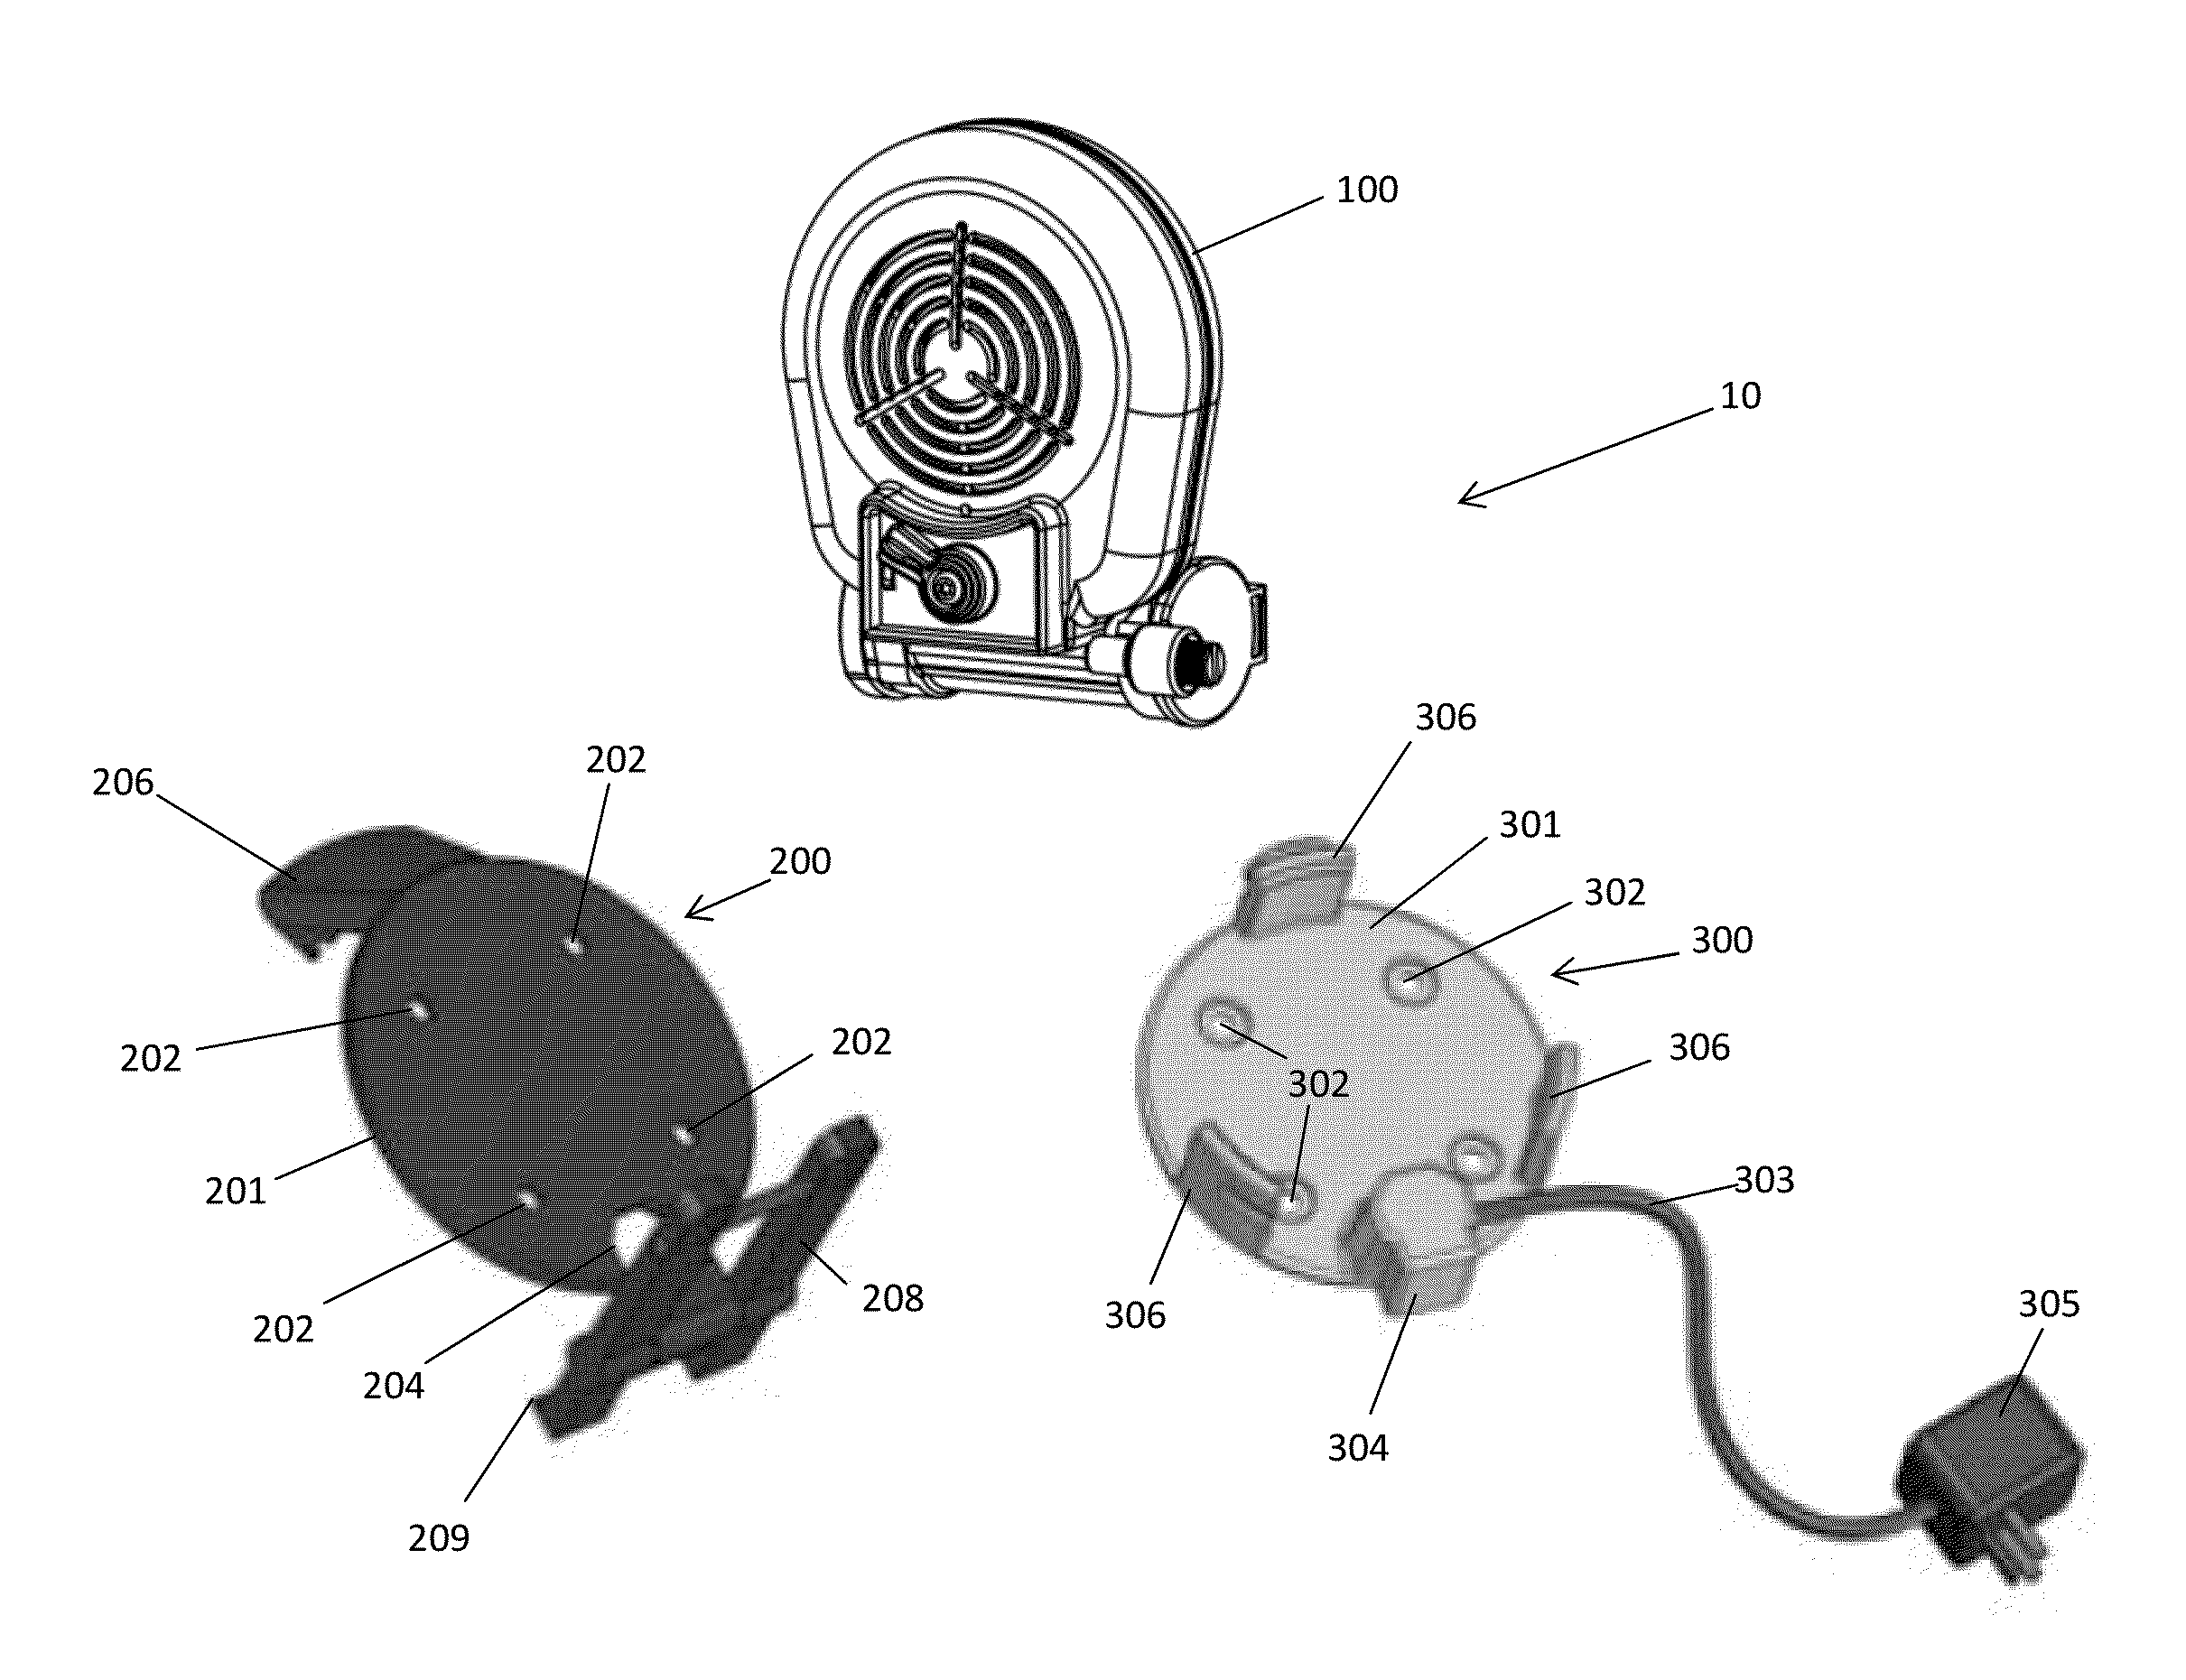 Modular voice amplification system for protective mask